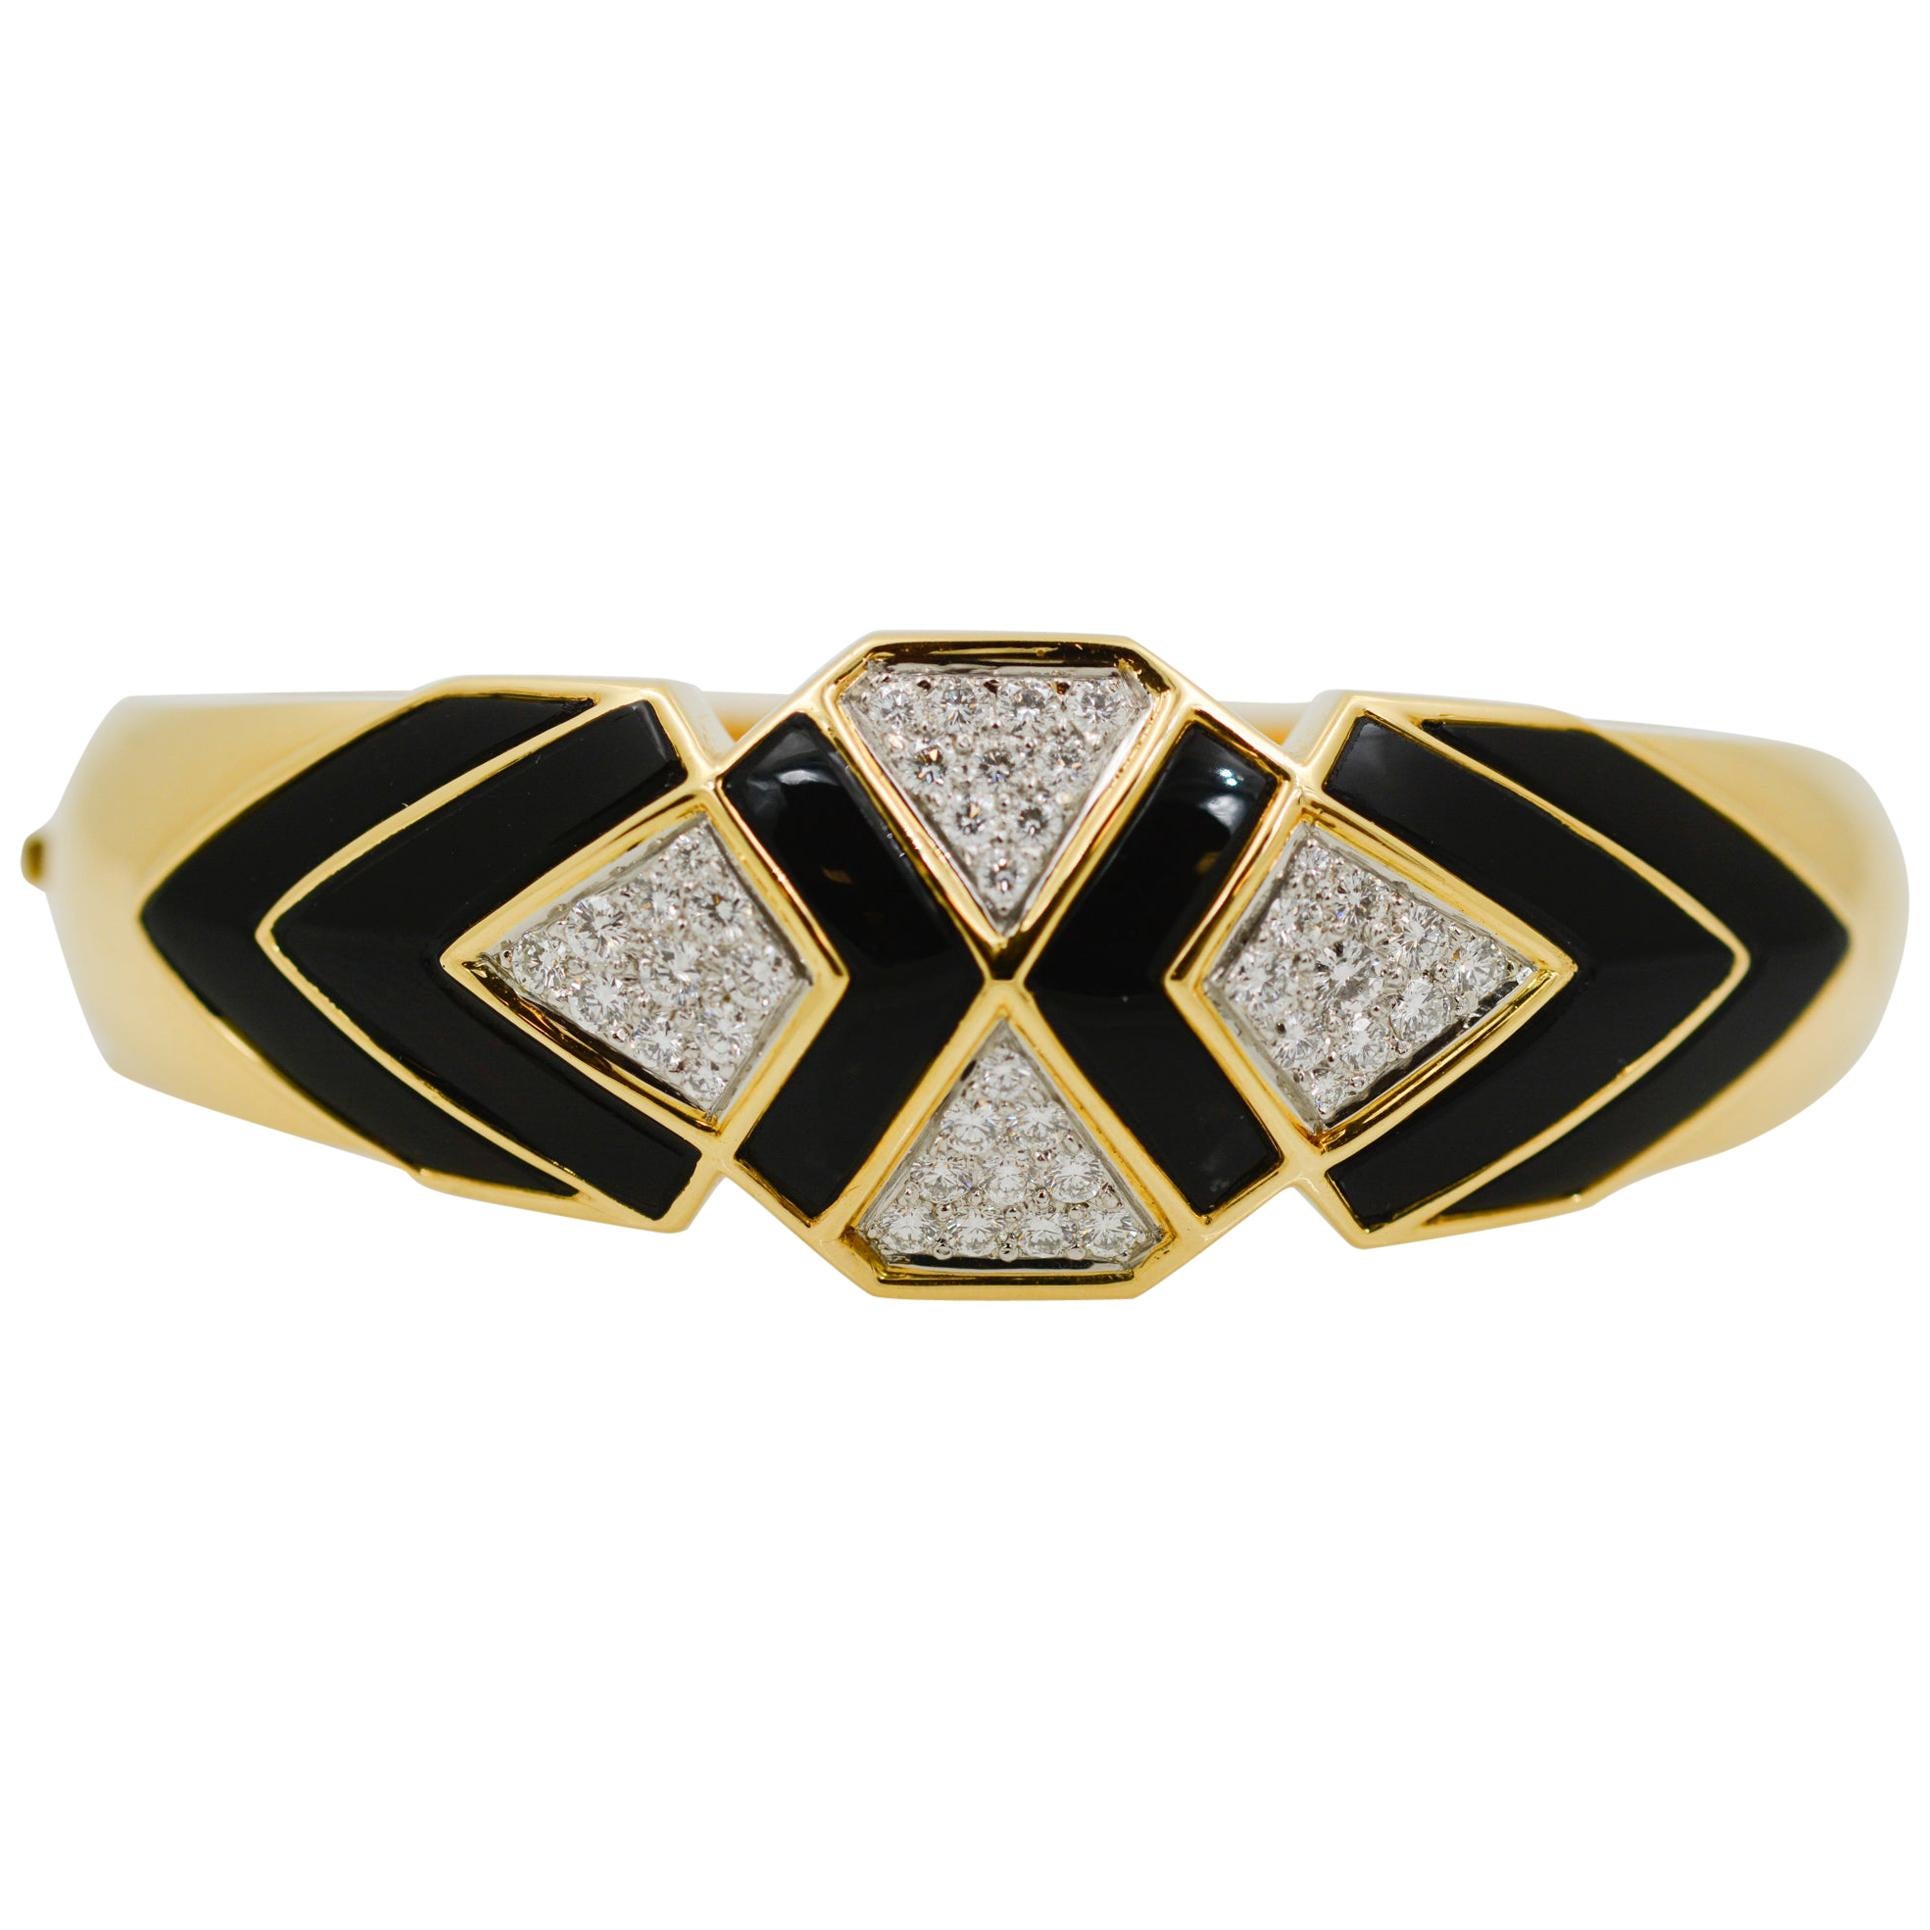 A bold black and white cuff crafted from 18 karat yellow gold featuring artfully cut geometric black onyx sections accenting angular sections of beautiful pave set diamonds. The stunning contrast of the black onyx against the white diamonds truly